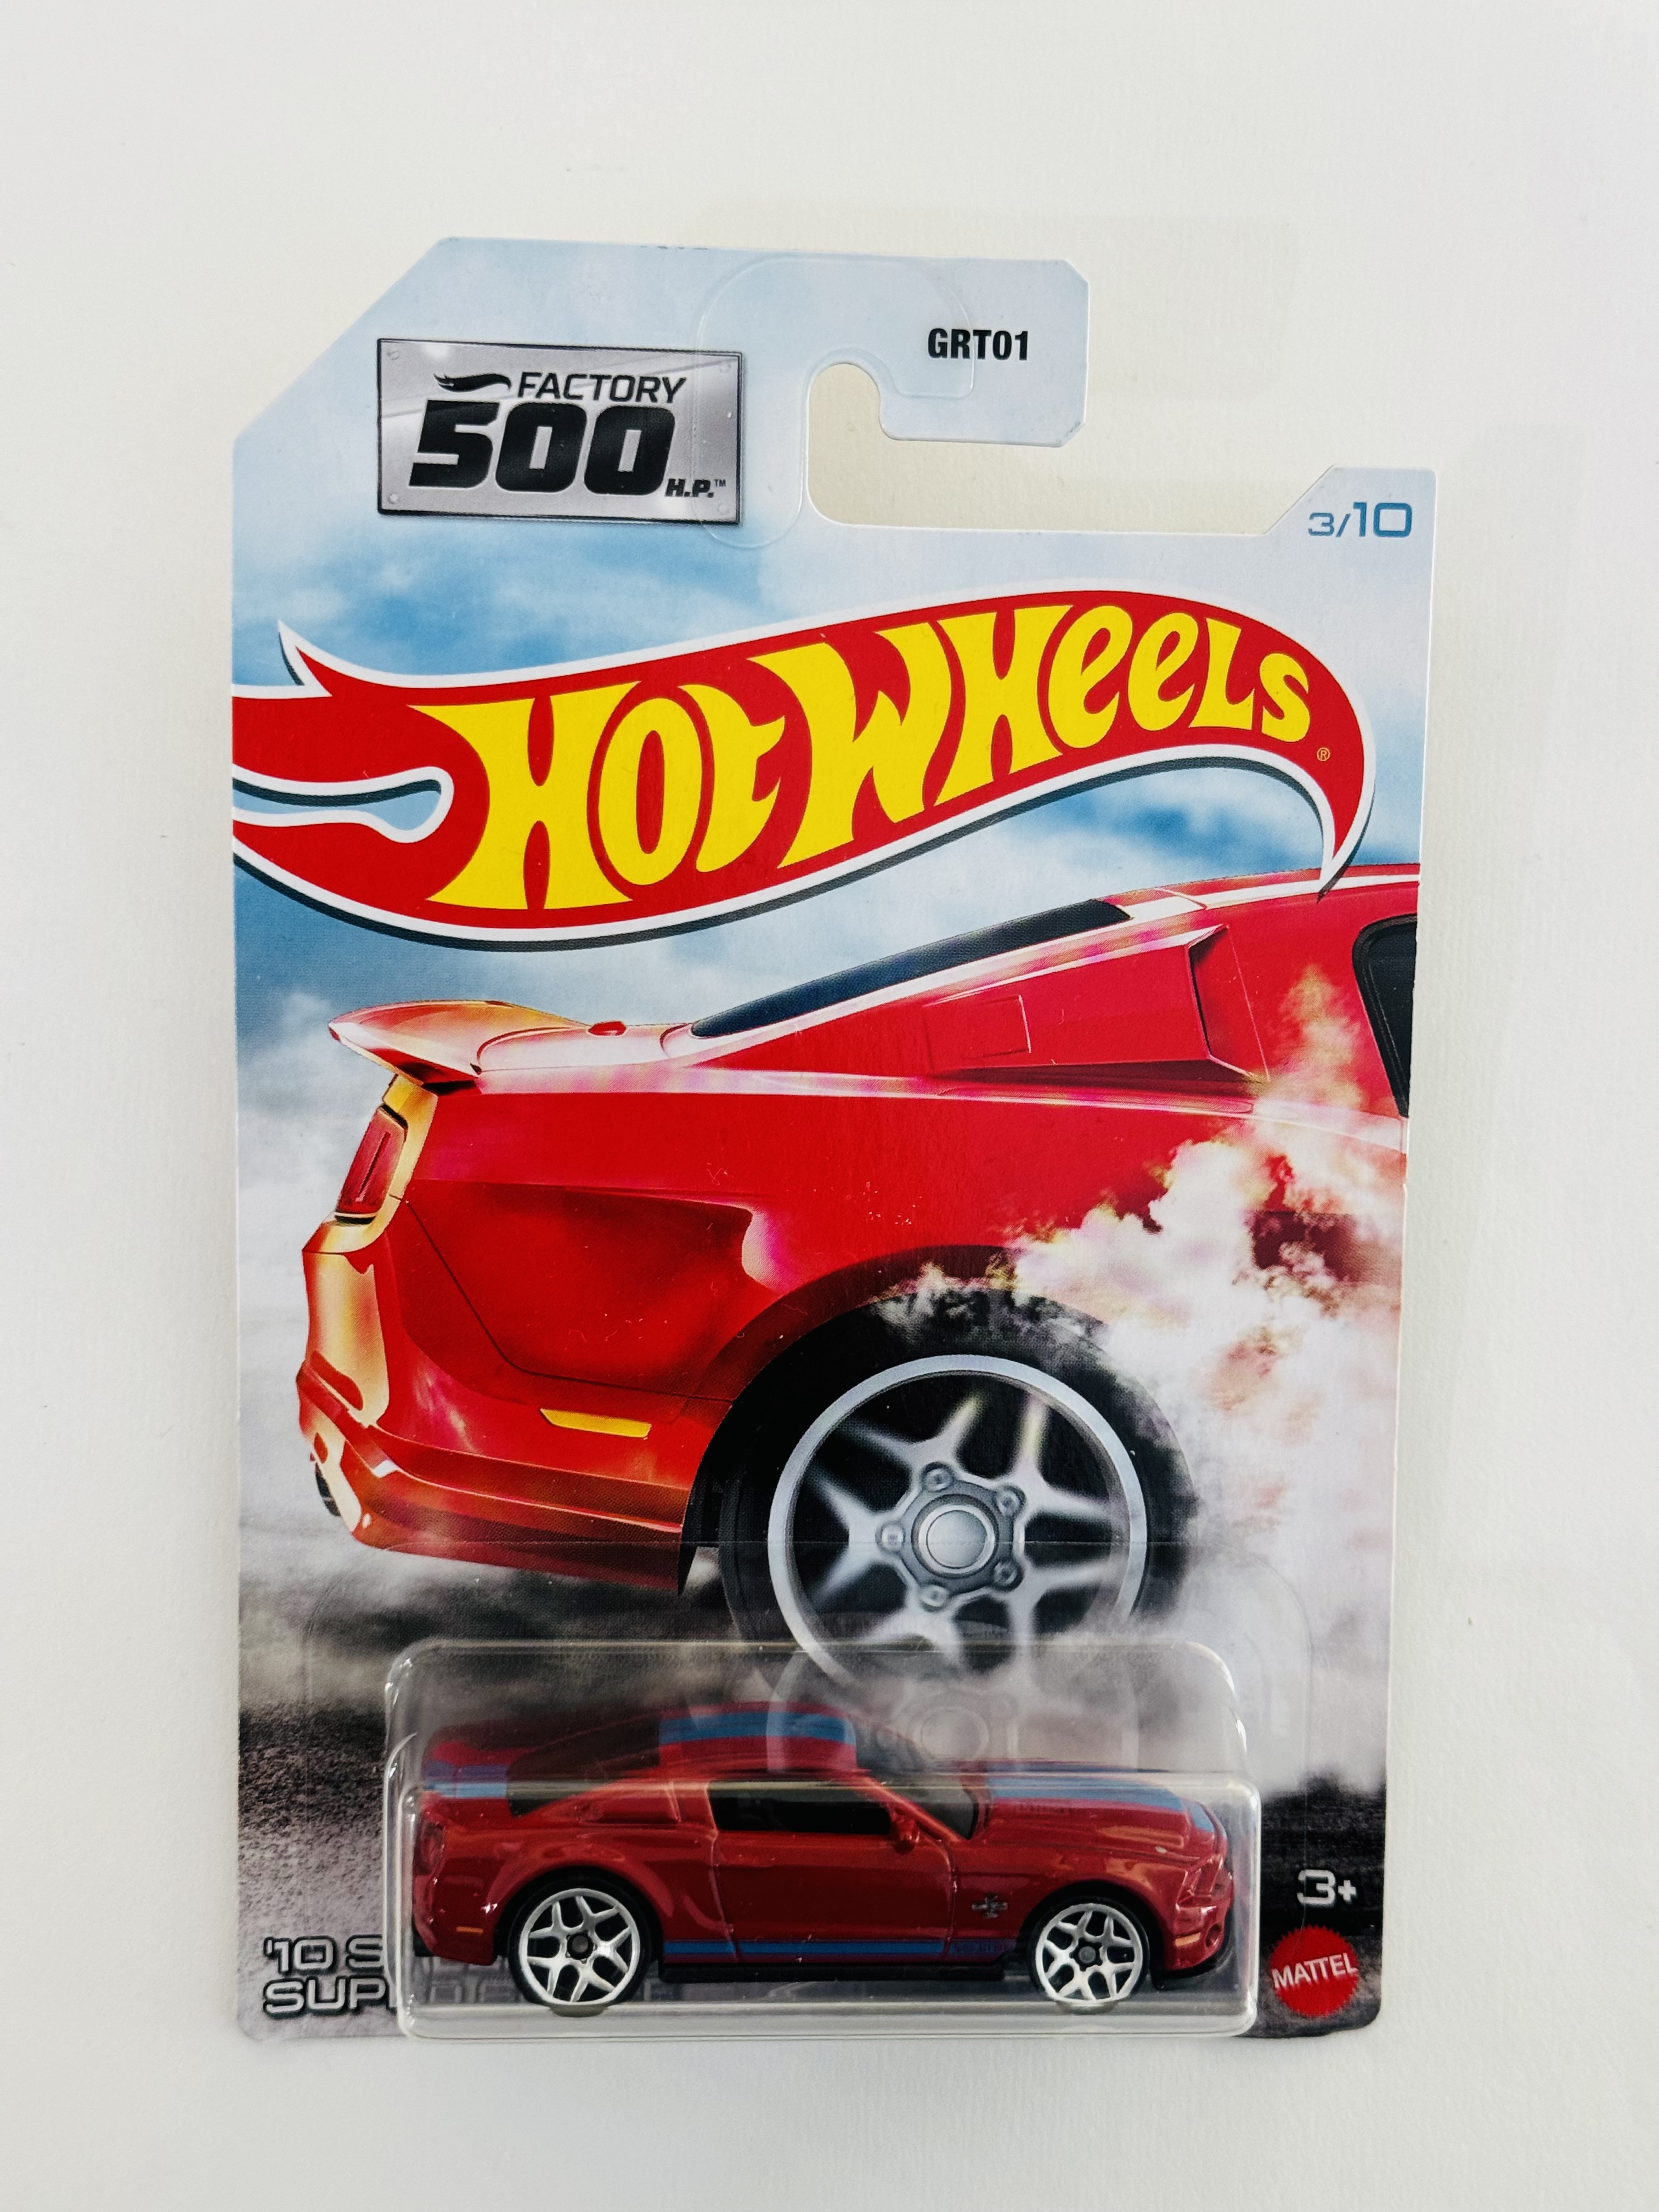 Hot Wheels Factory 500 H.P. '10 Shelby GT500 Supersnake - Walmart Exclusive